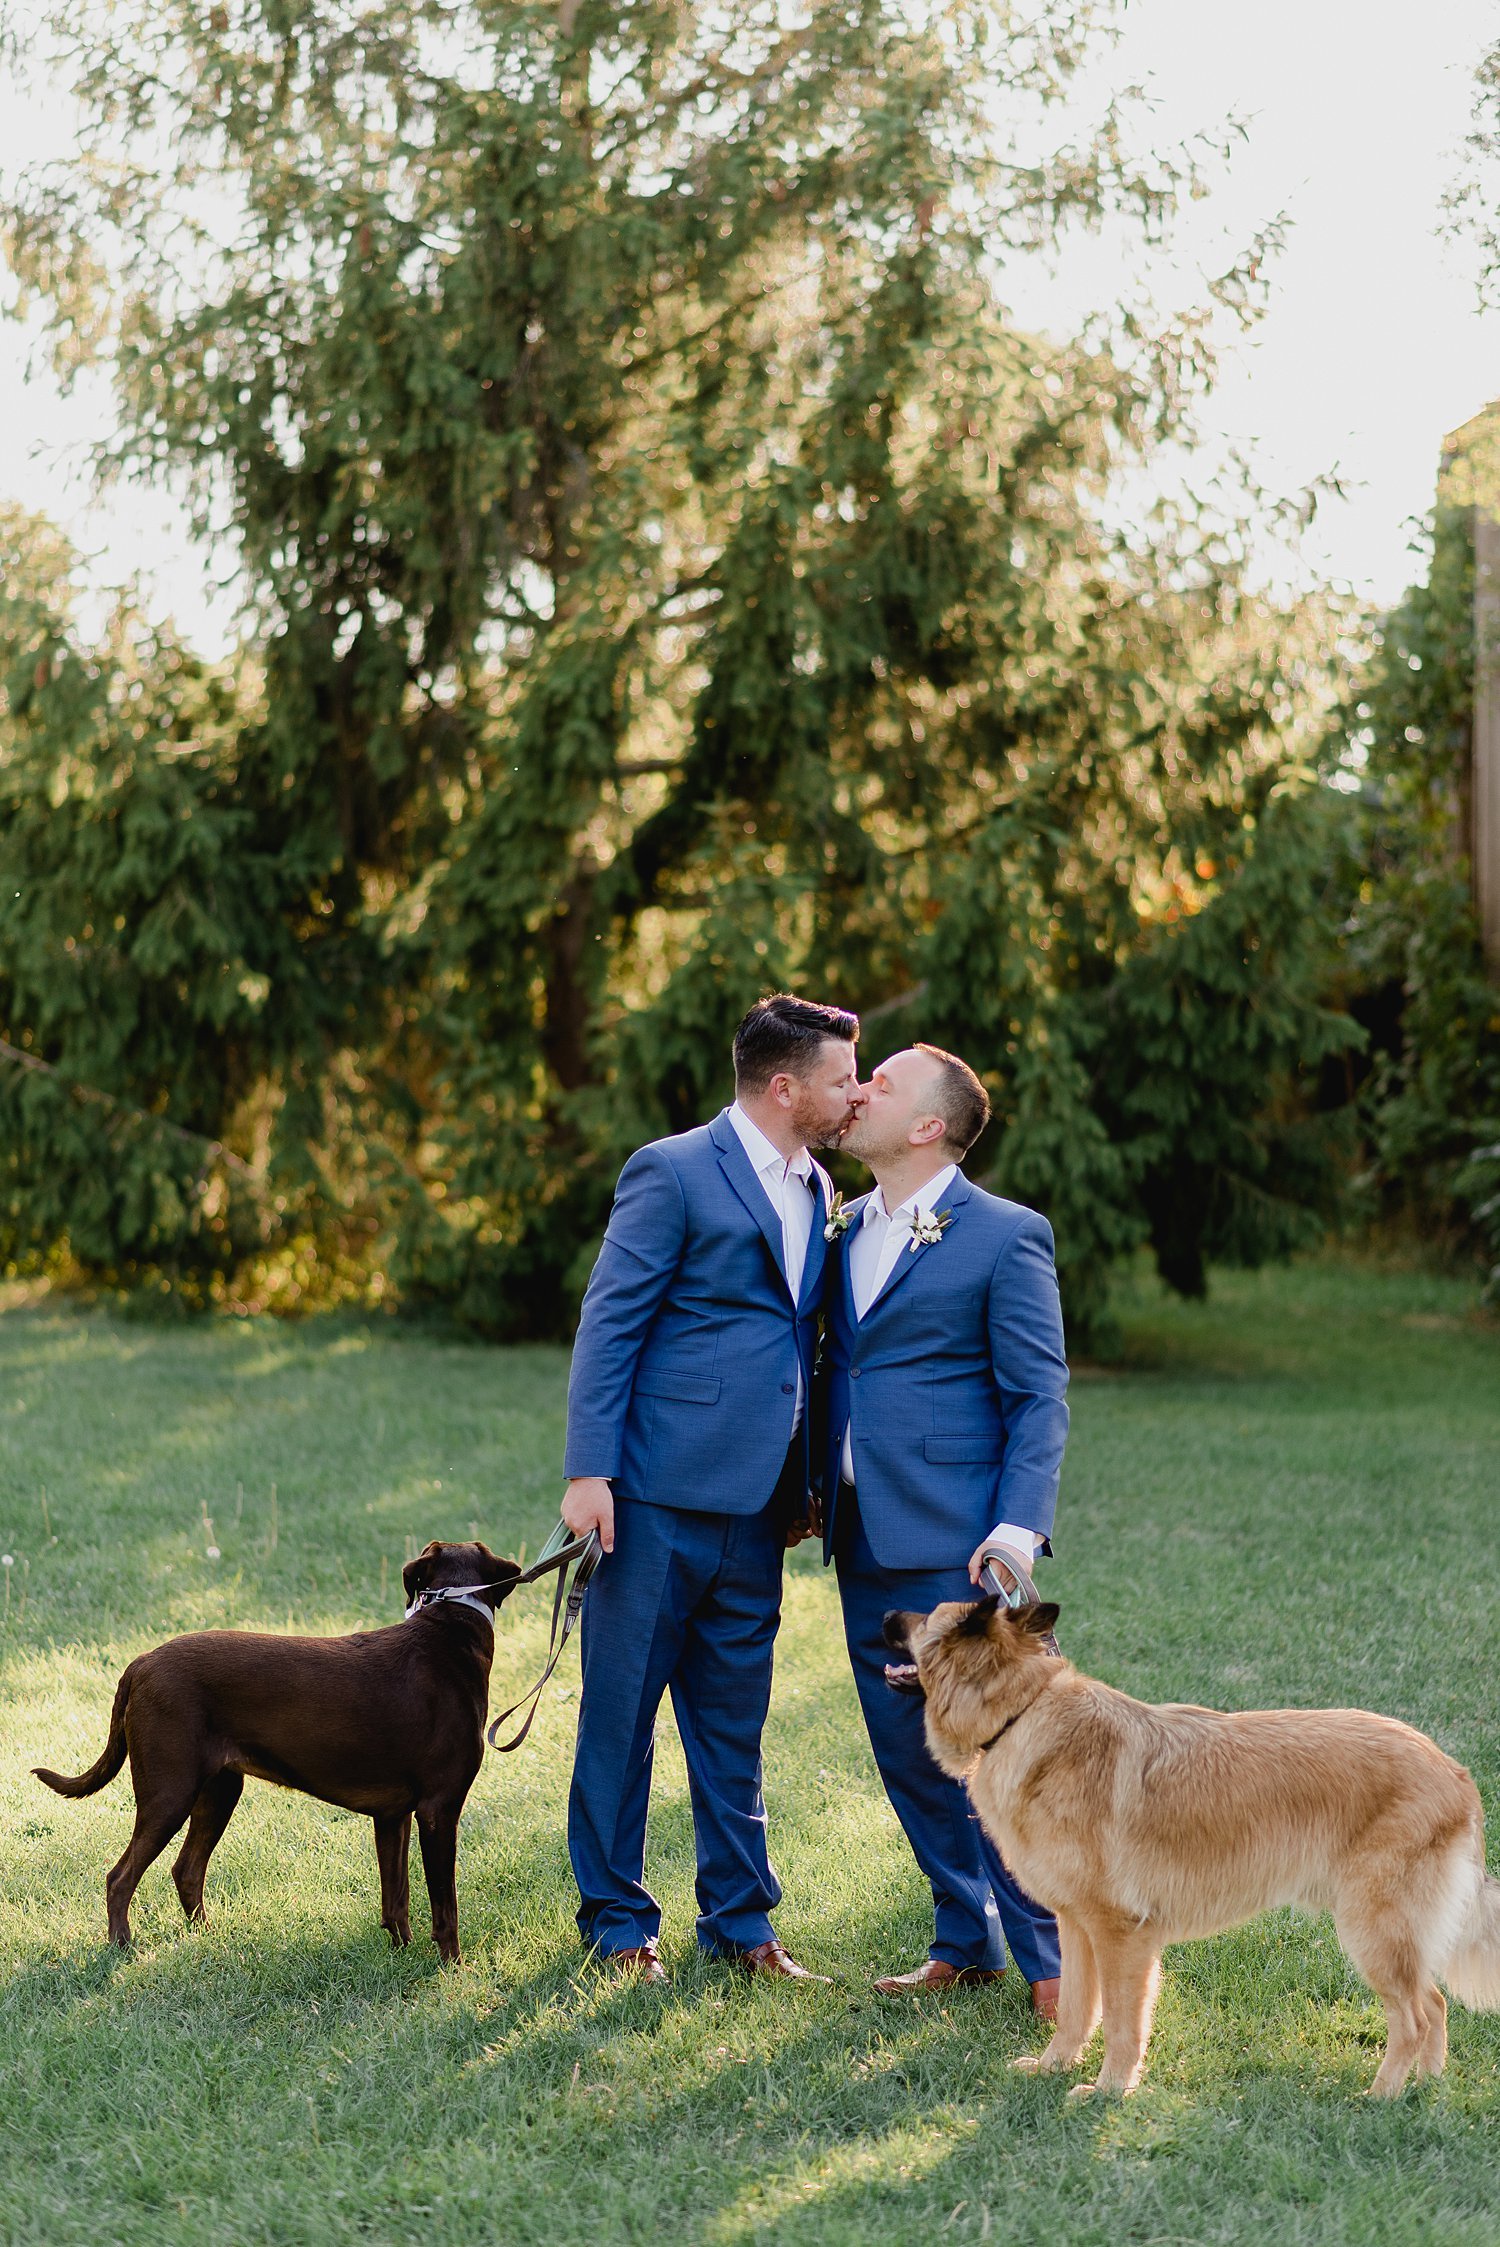 An Intimate Elopement at an Airbnb in Prince Edward County | Prince Edward County Wedding Photographer | Holly McMurter Photographs_0017.jpg